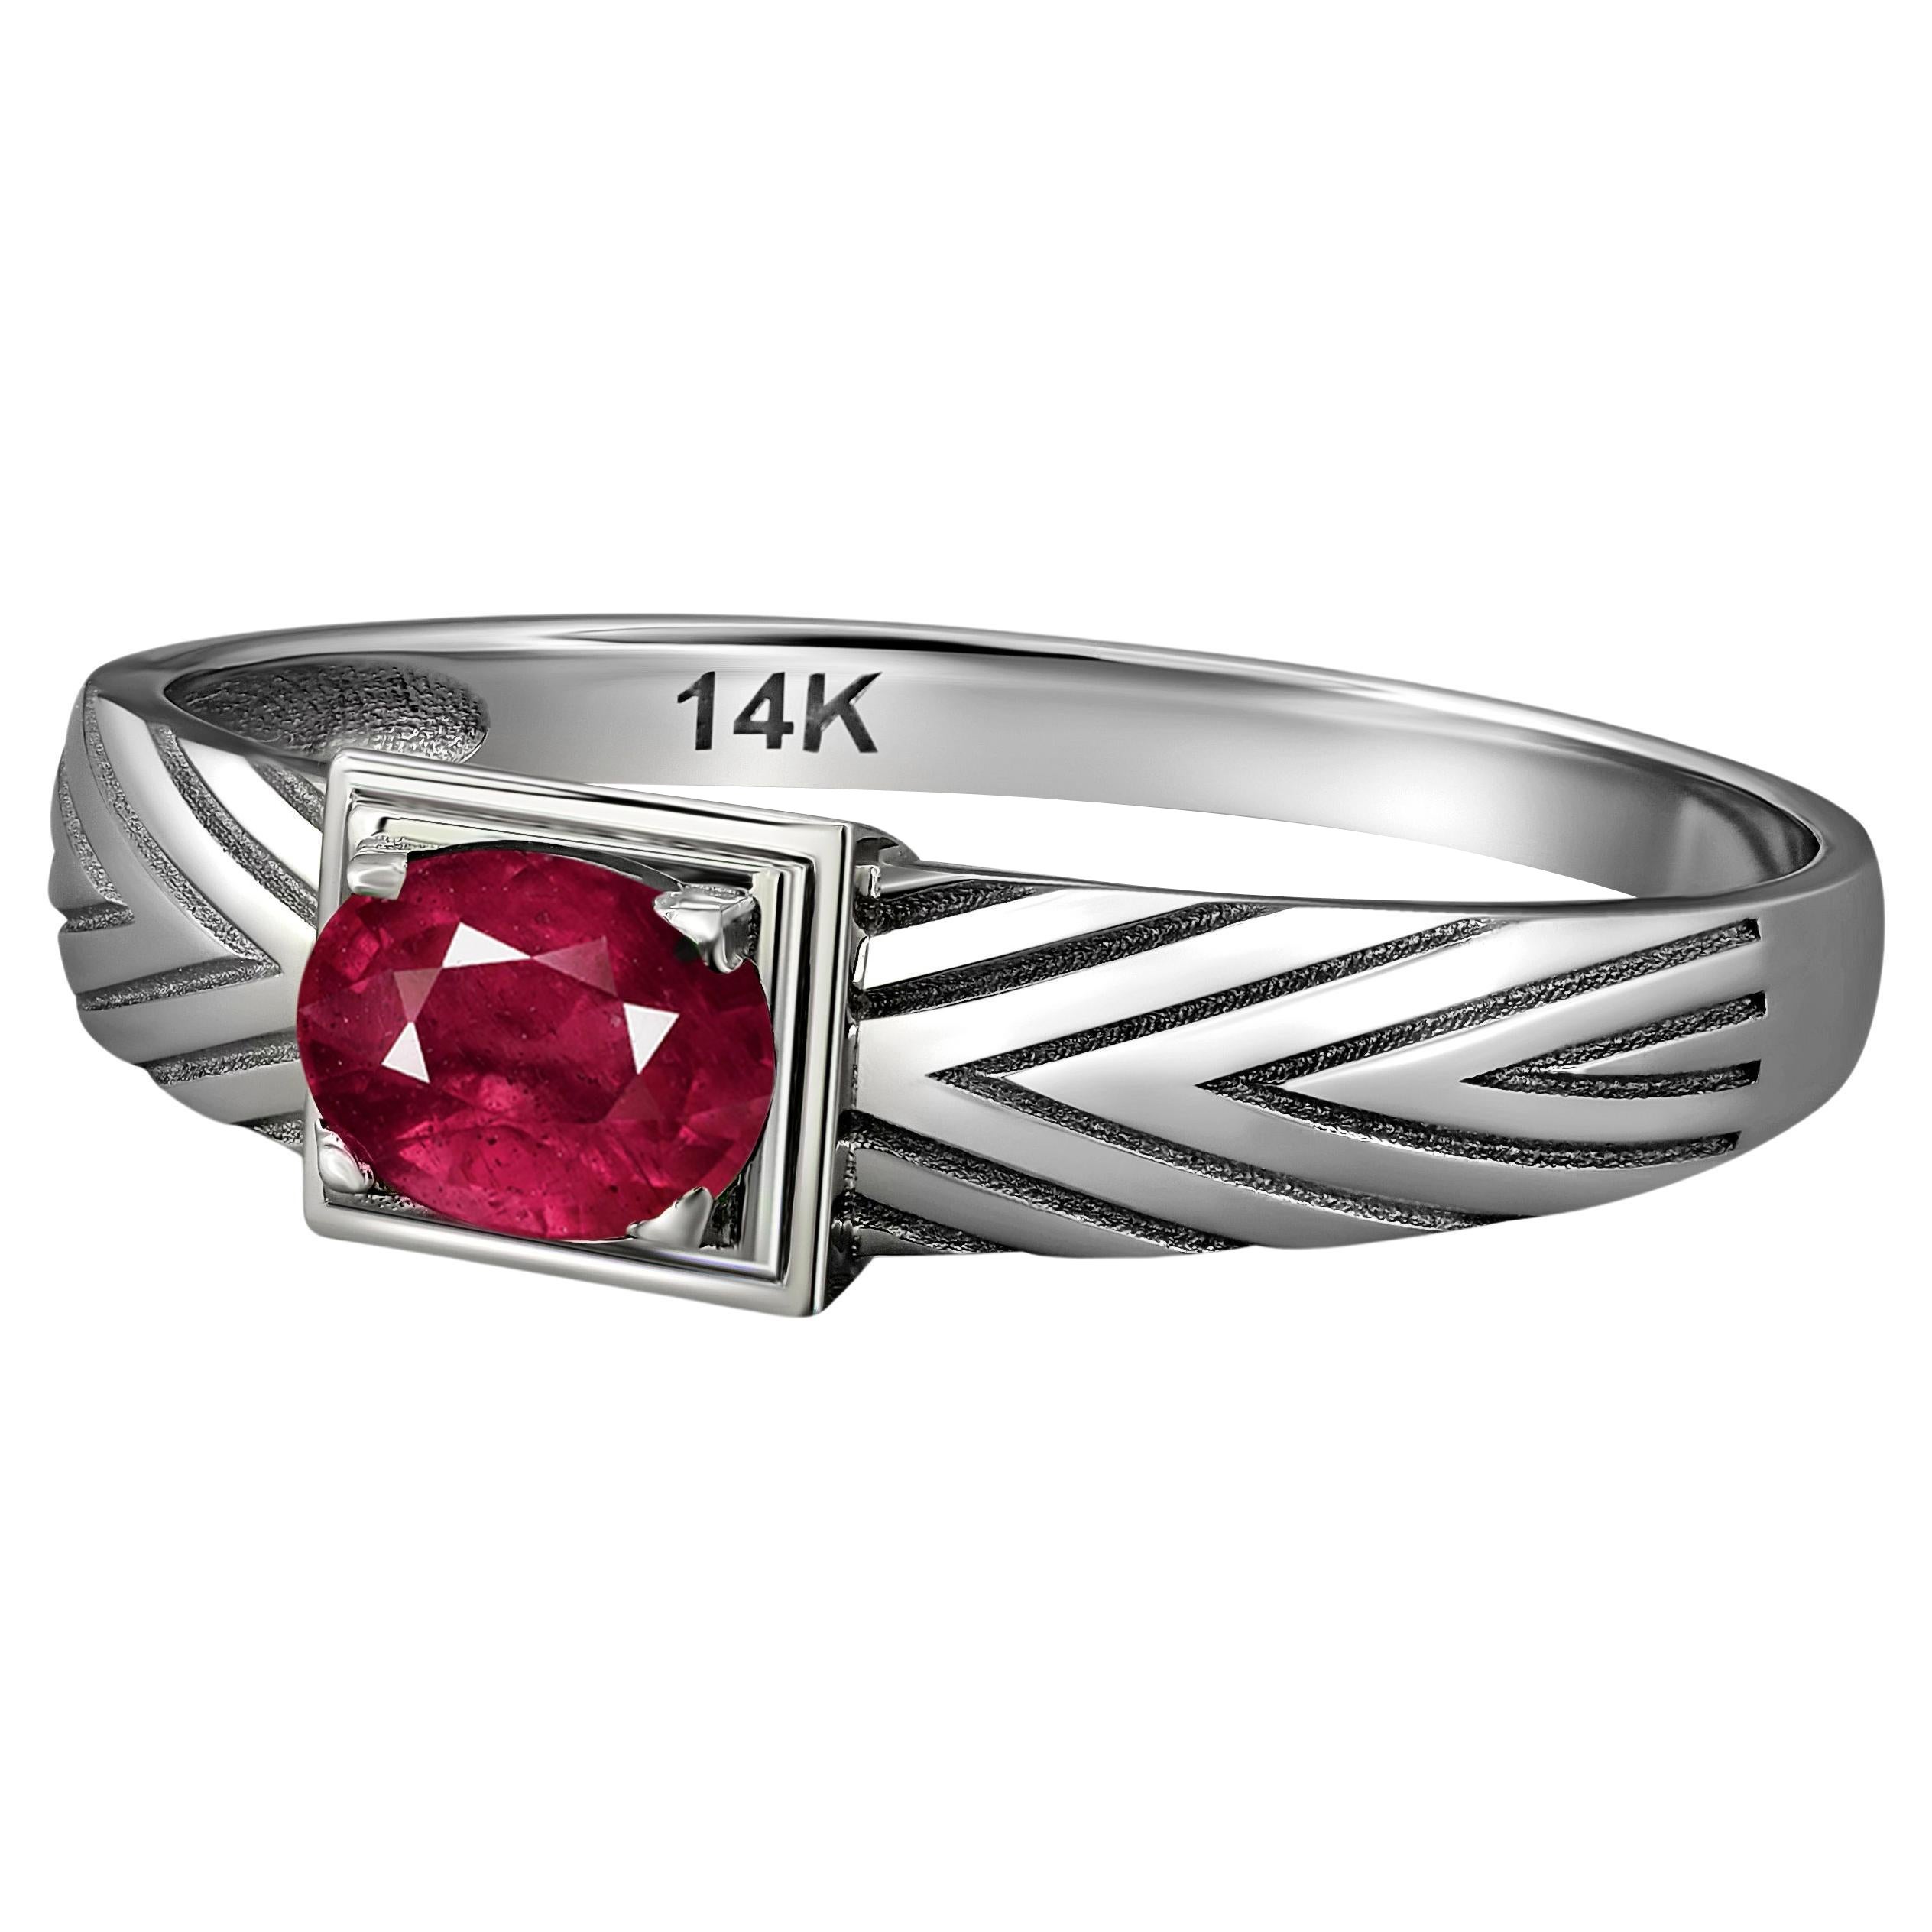 14k Gold Mens Ring with Ruby, Gold Ring for Men with Ruby